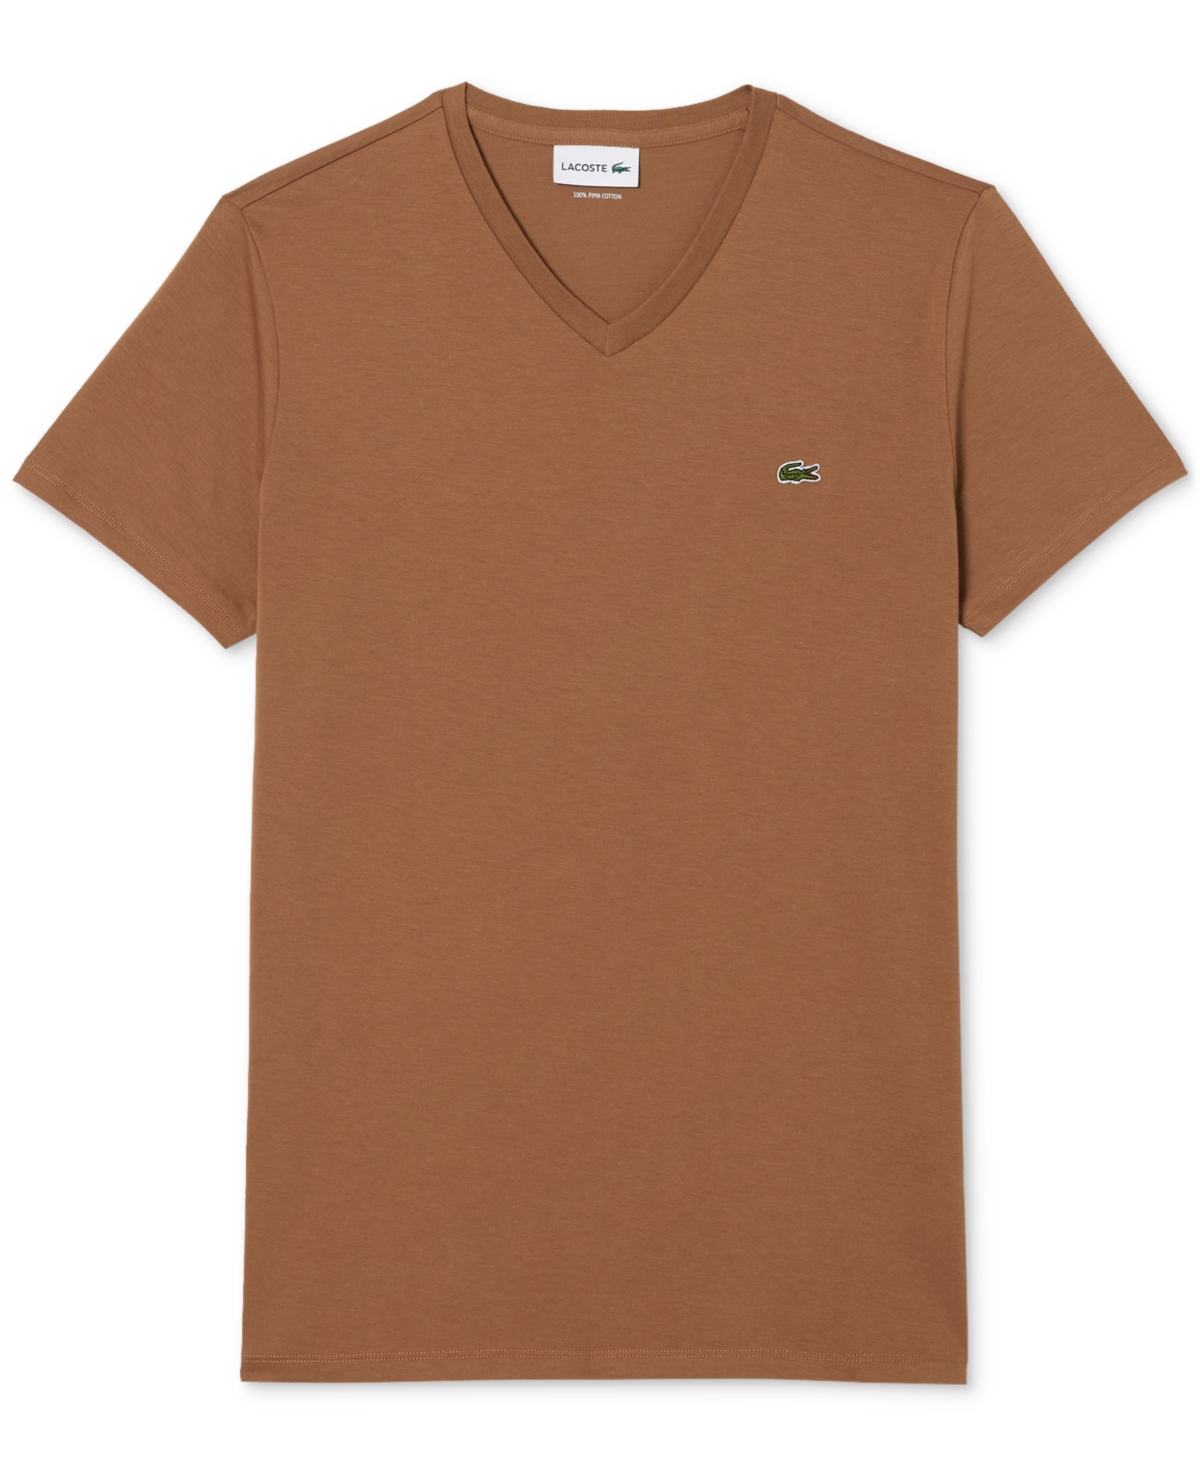 Lacoste Men's V-neck Pima Cotton Tee Shirt In Six Cookie